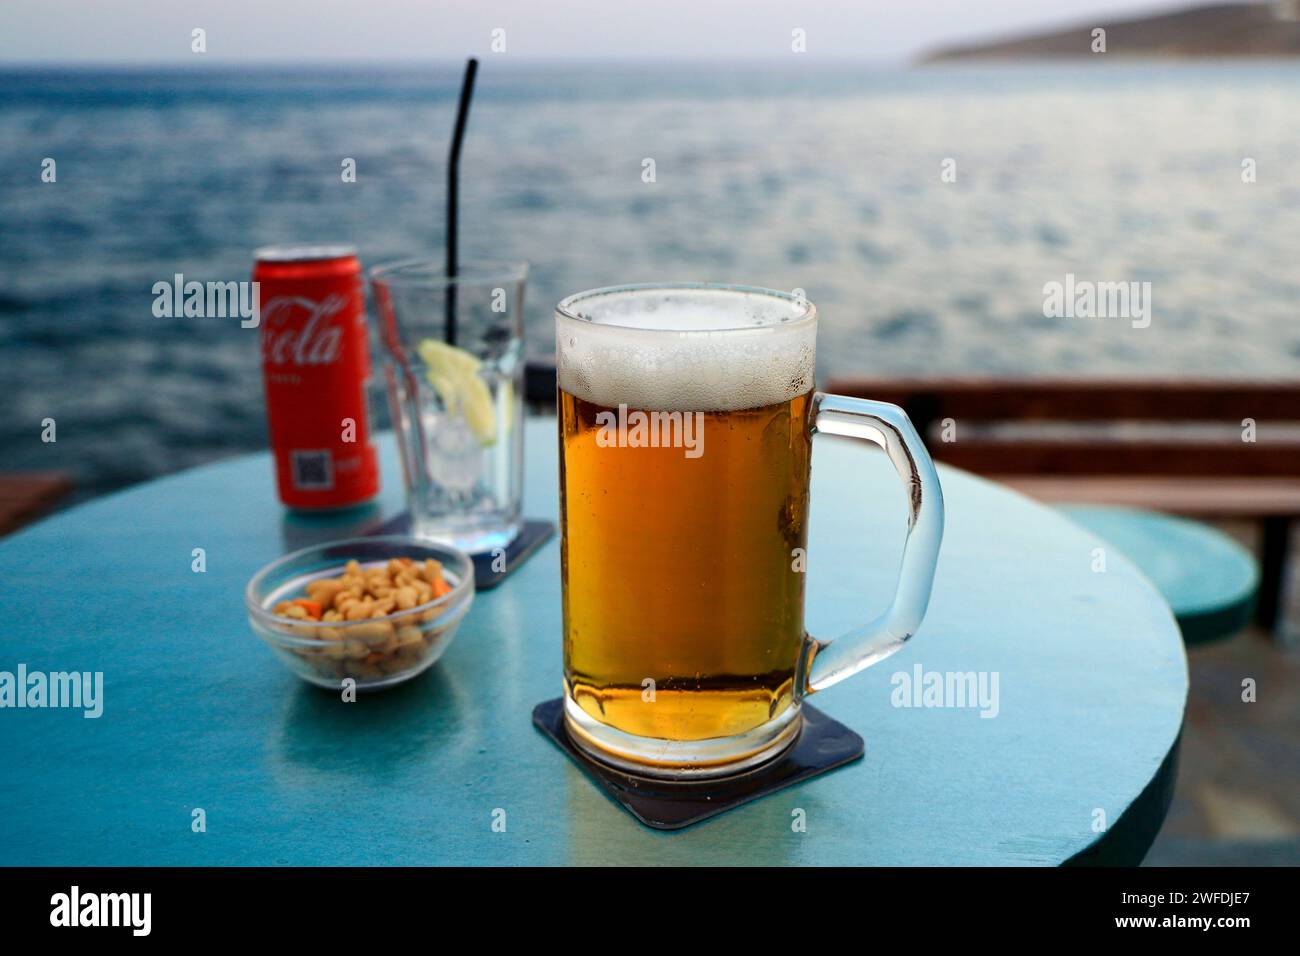 Beer, Coke and nuts, Tilos, Greece. Stock Photo